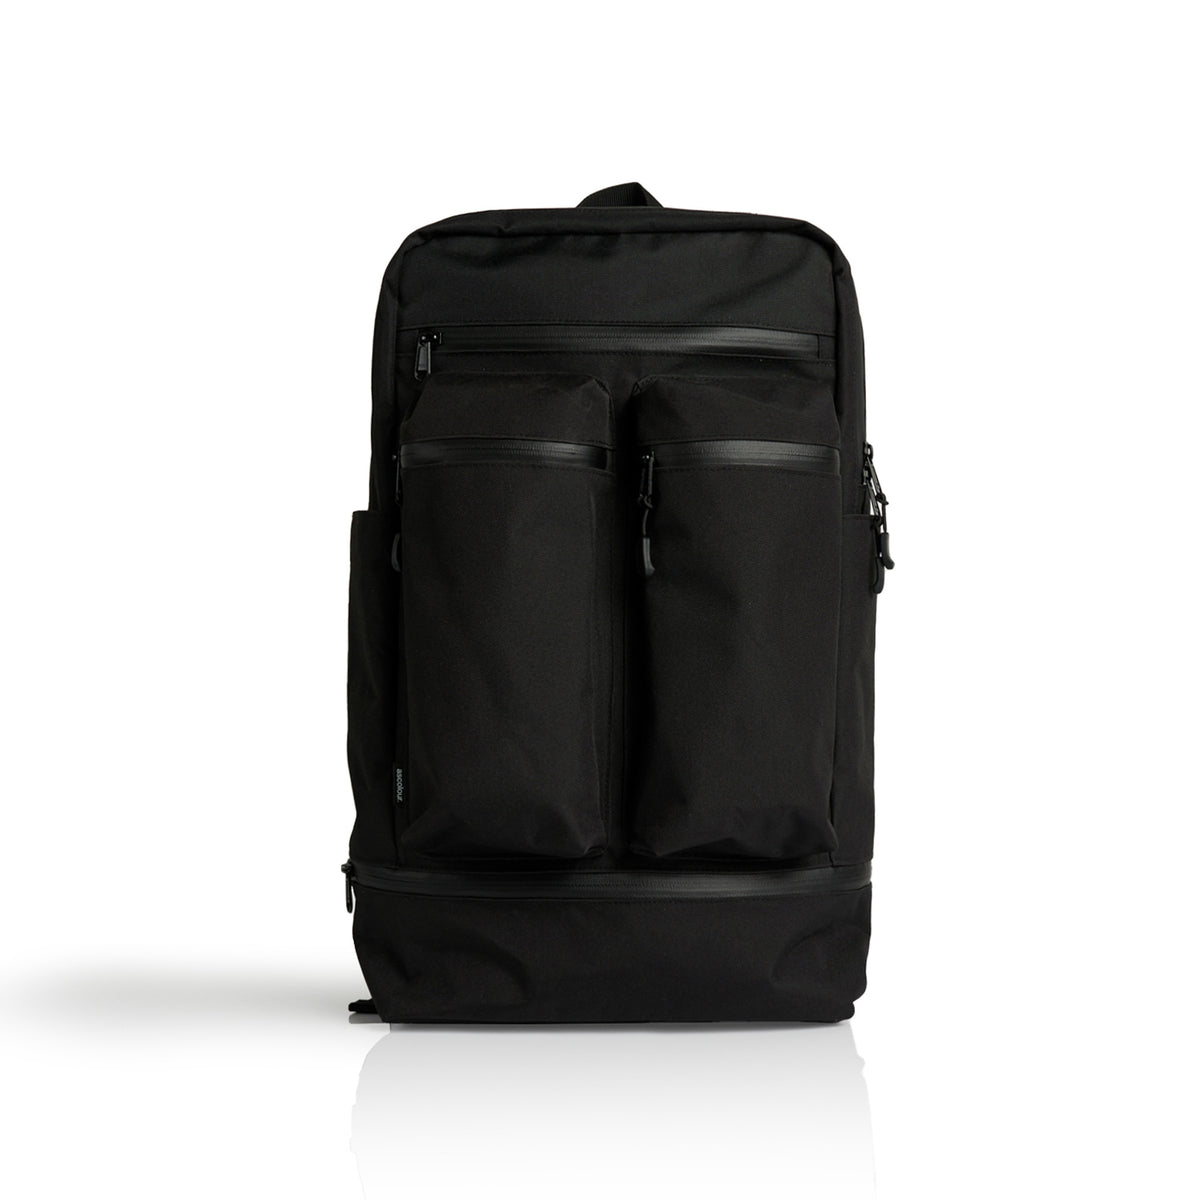 RECYCLED TRAVEL BACKPACK - 1030